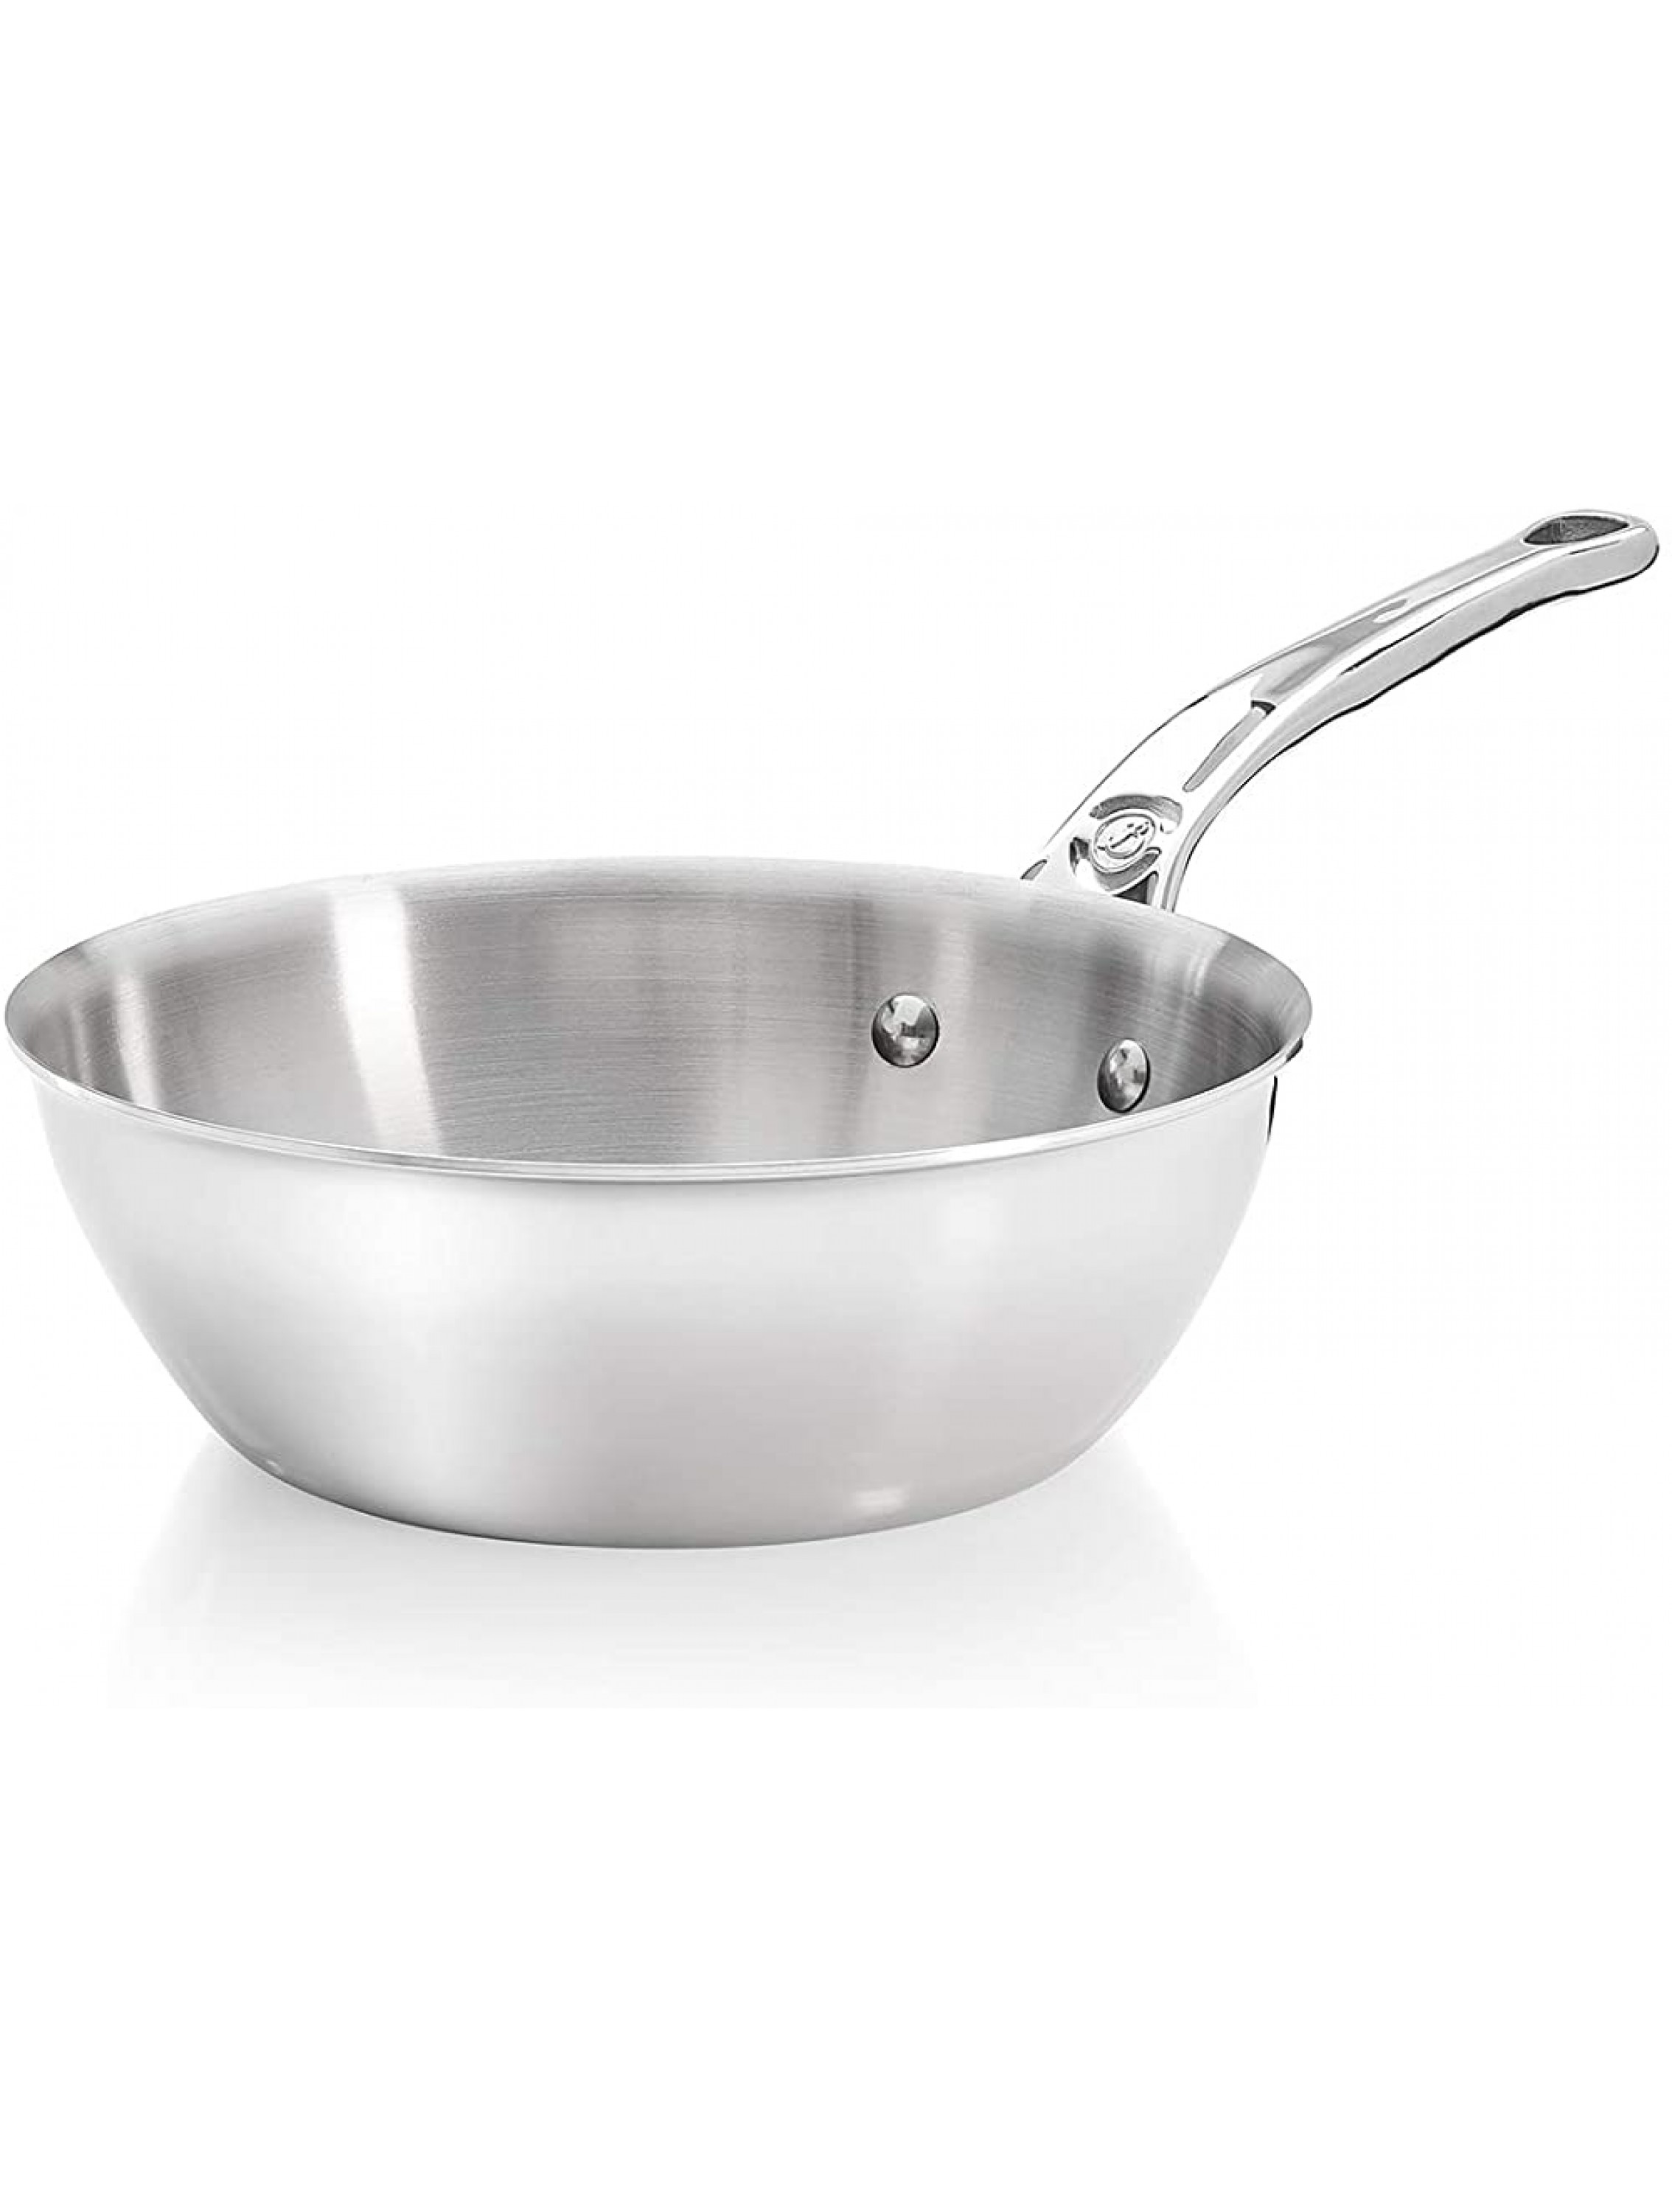 DeBuyer Affinity 3.17-Quart Rounded Saute-pan Stainless Steel - BV06H1DM4